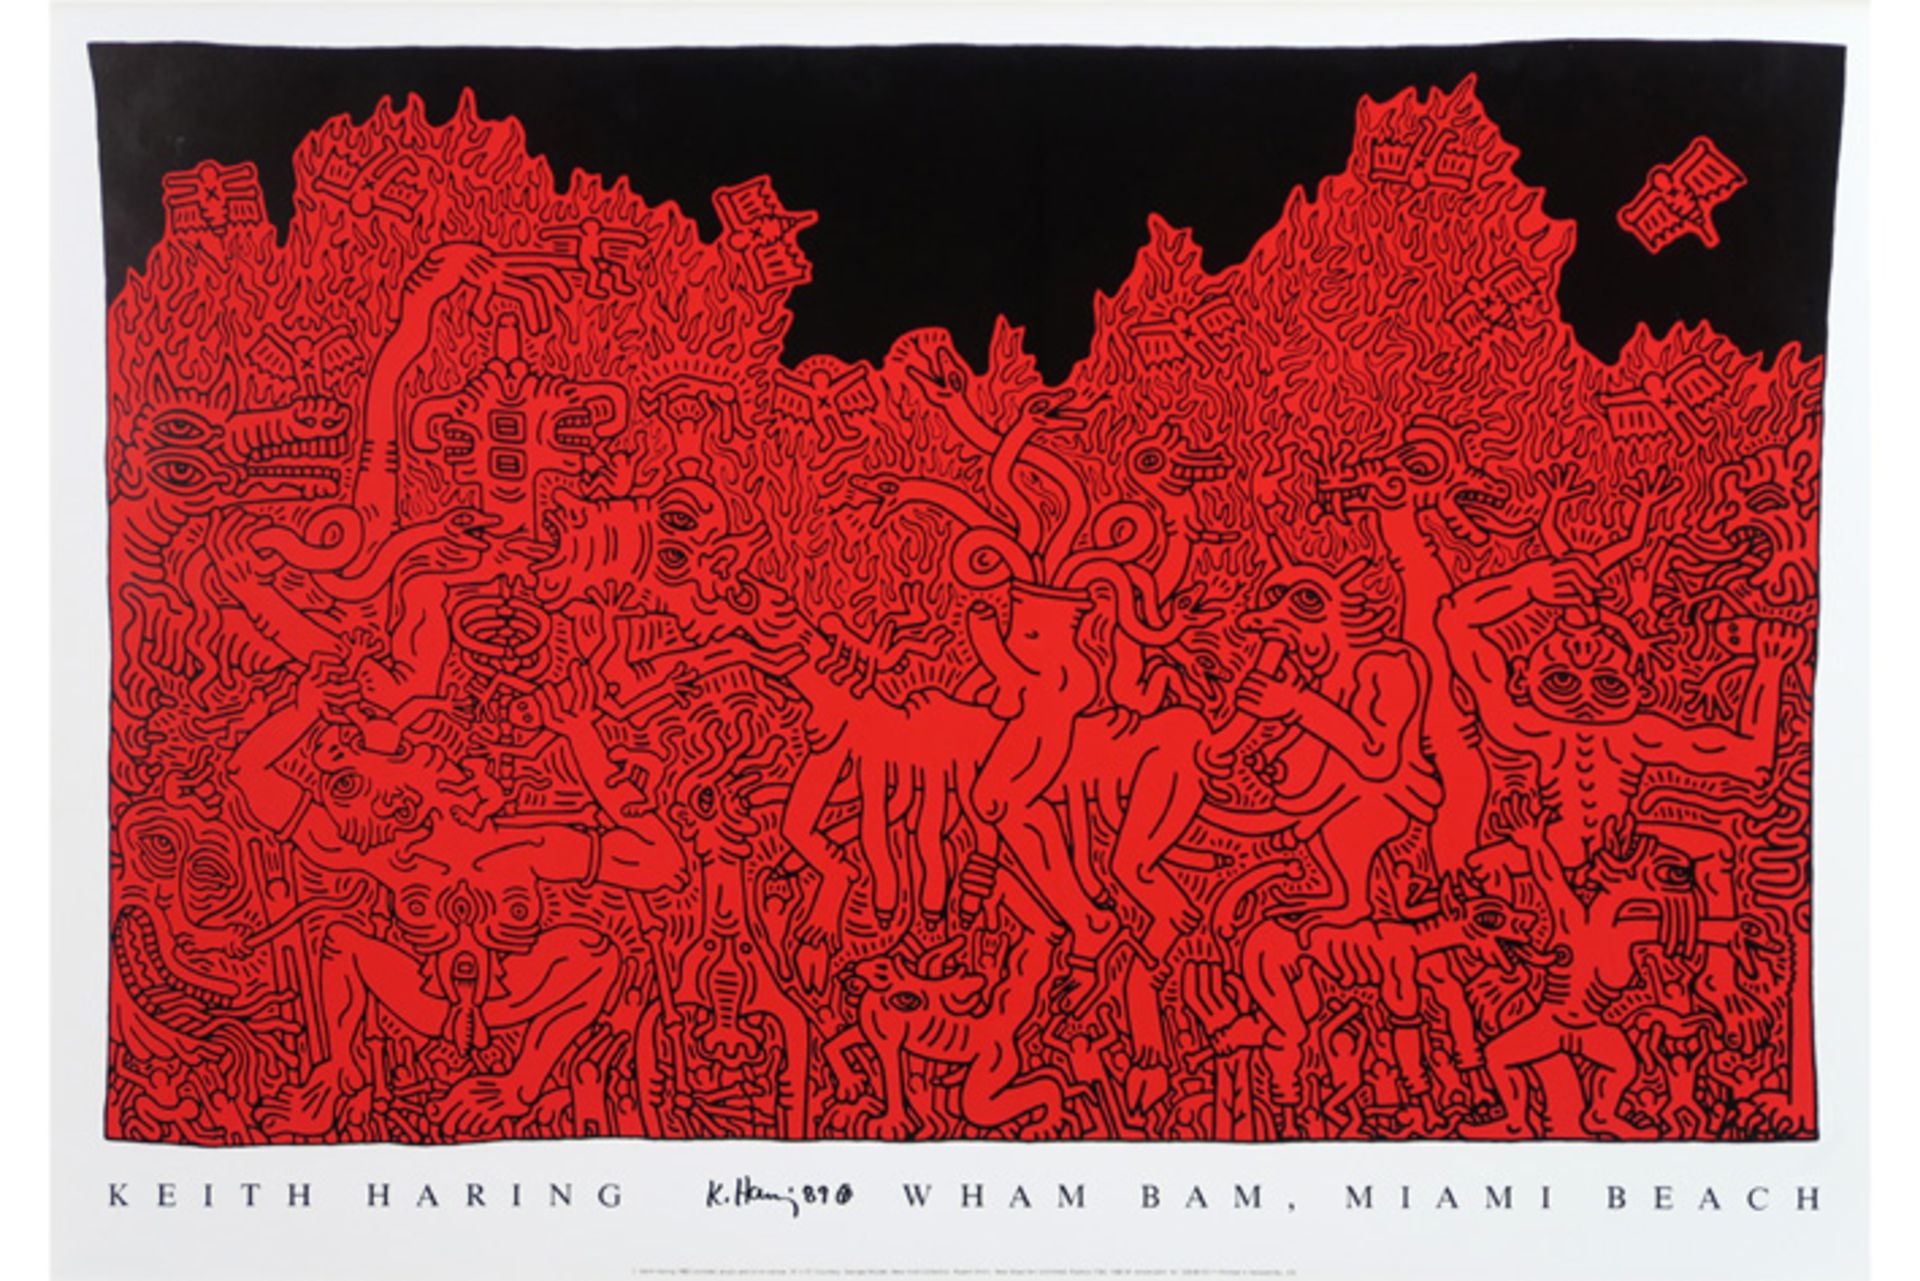 Keith Haring signed and (19)89 dated print with the representation of Haring's painting "Wham Bam,